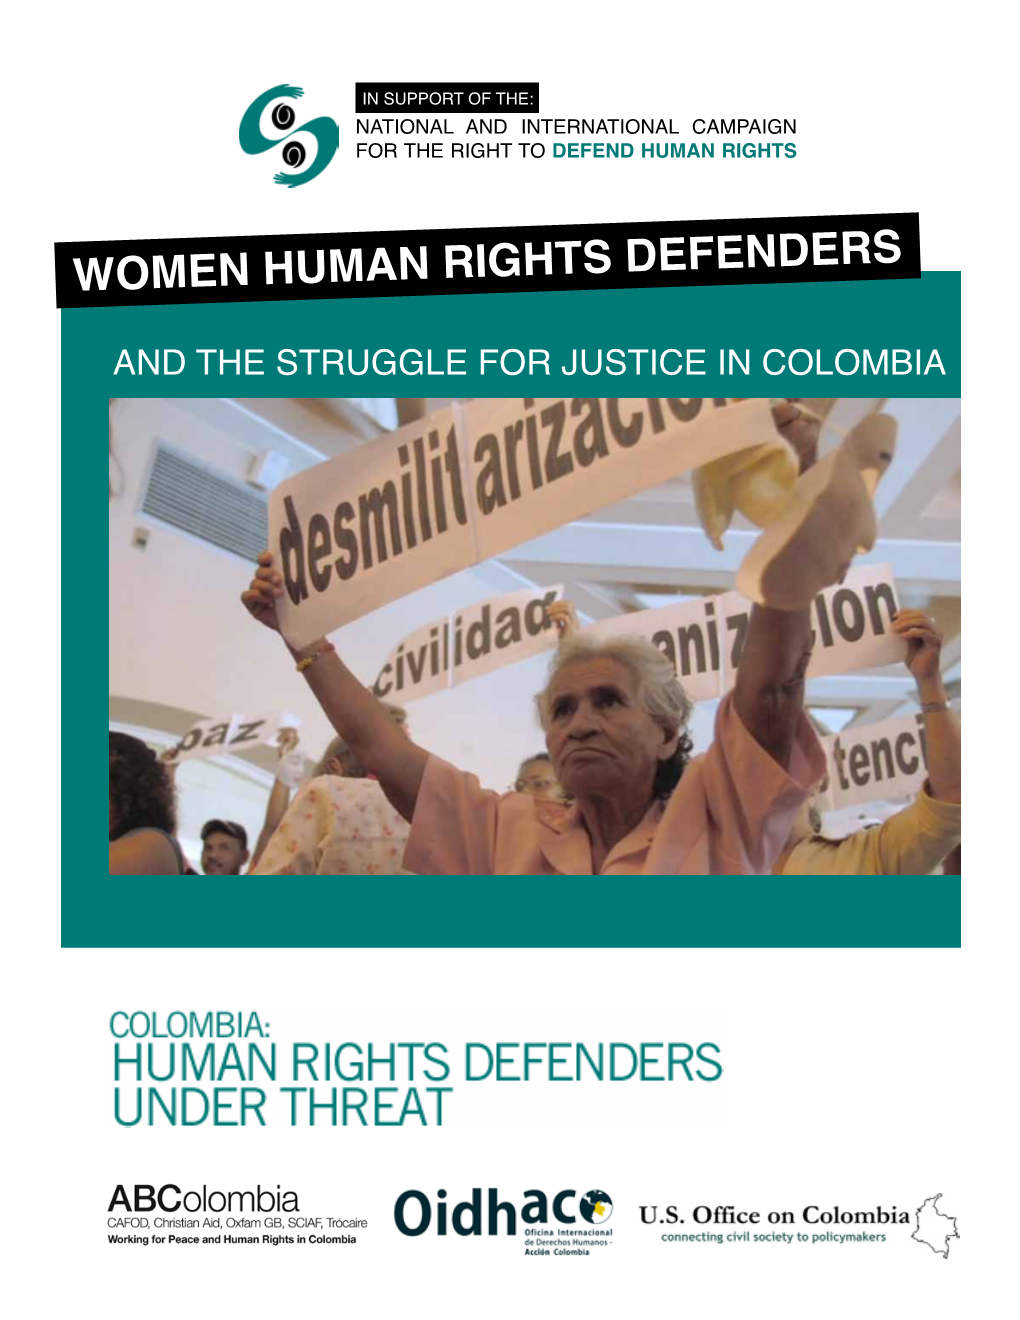 Women Human Rights Defenders and the Struggle for Justice in Colombia